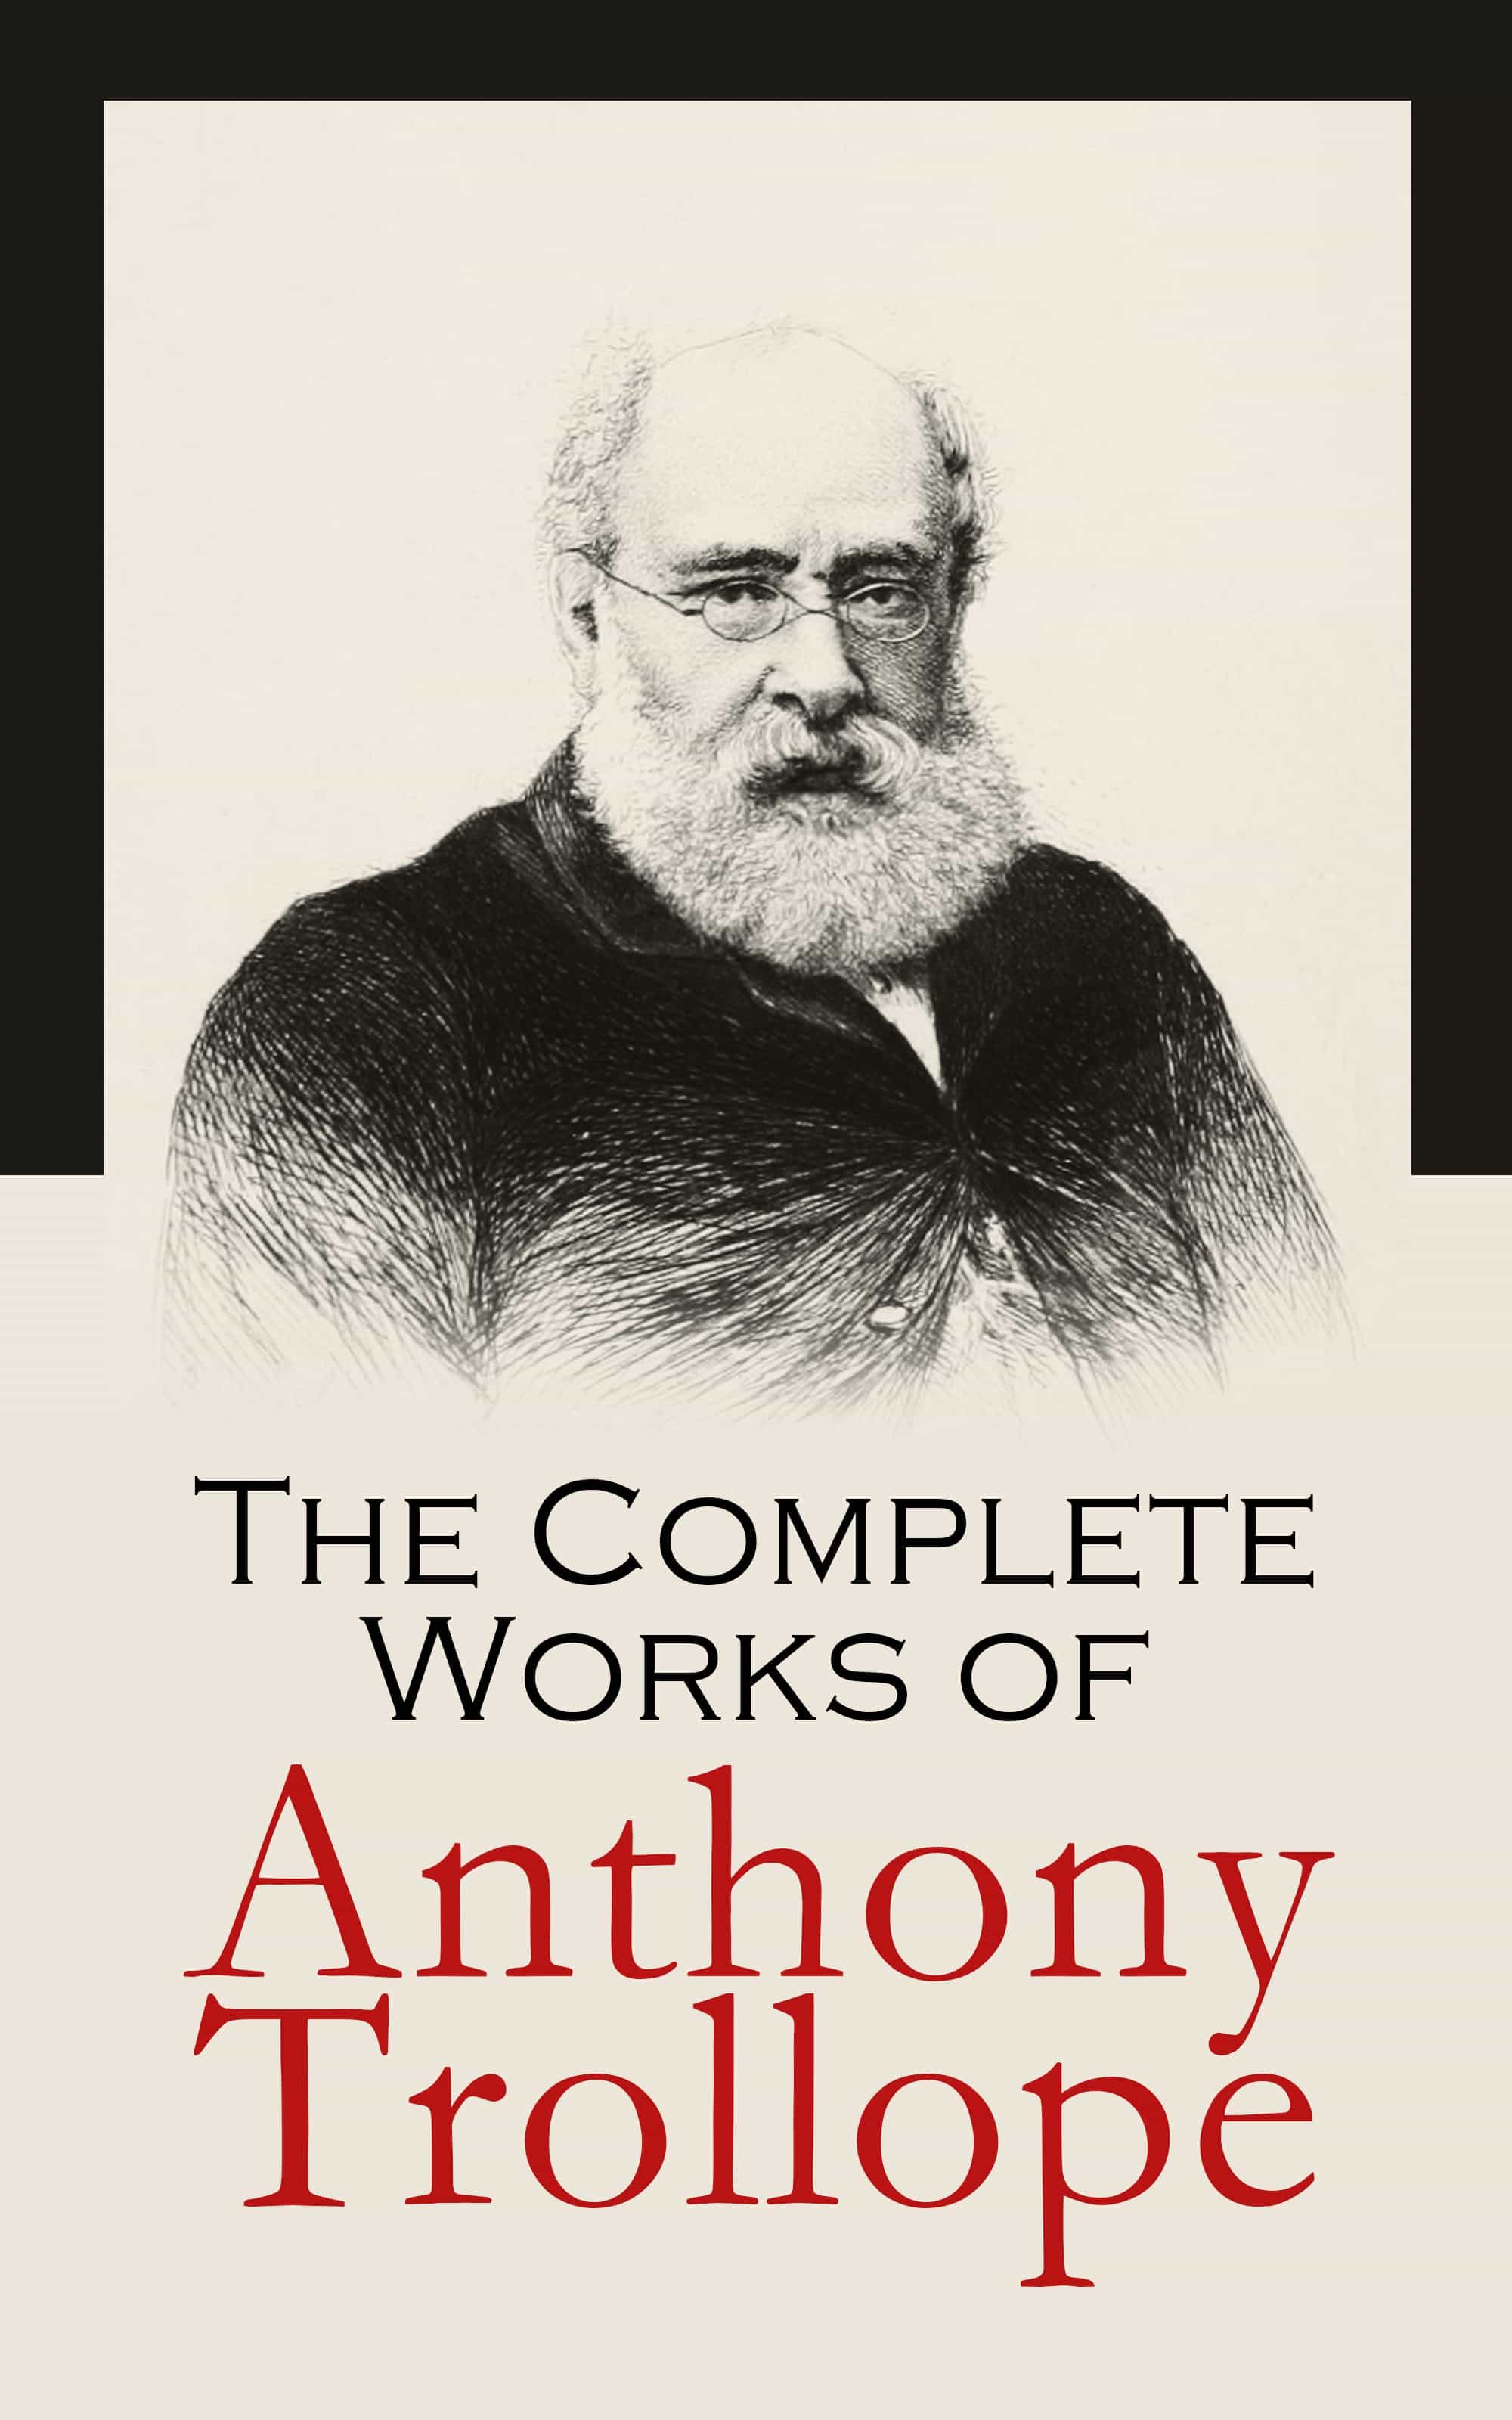 The Fixed Period by Anthony Trollope